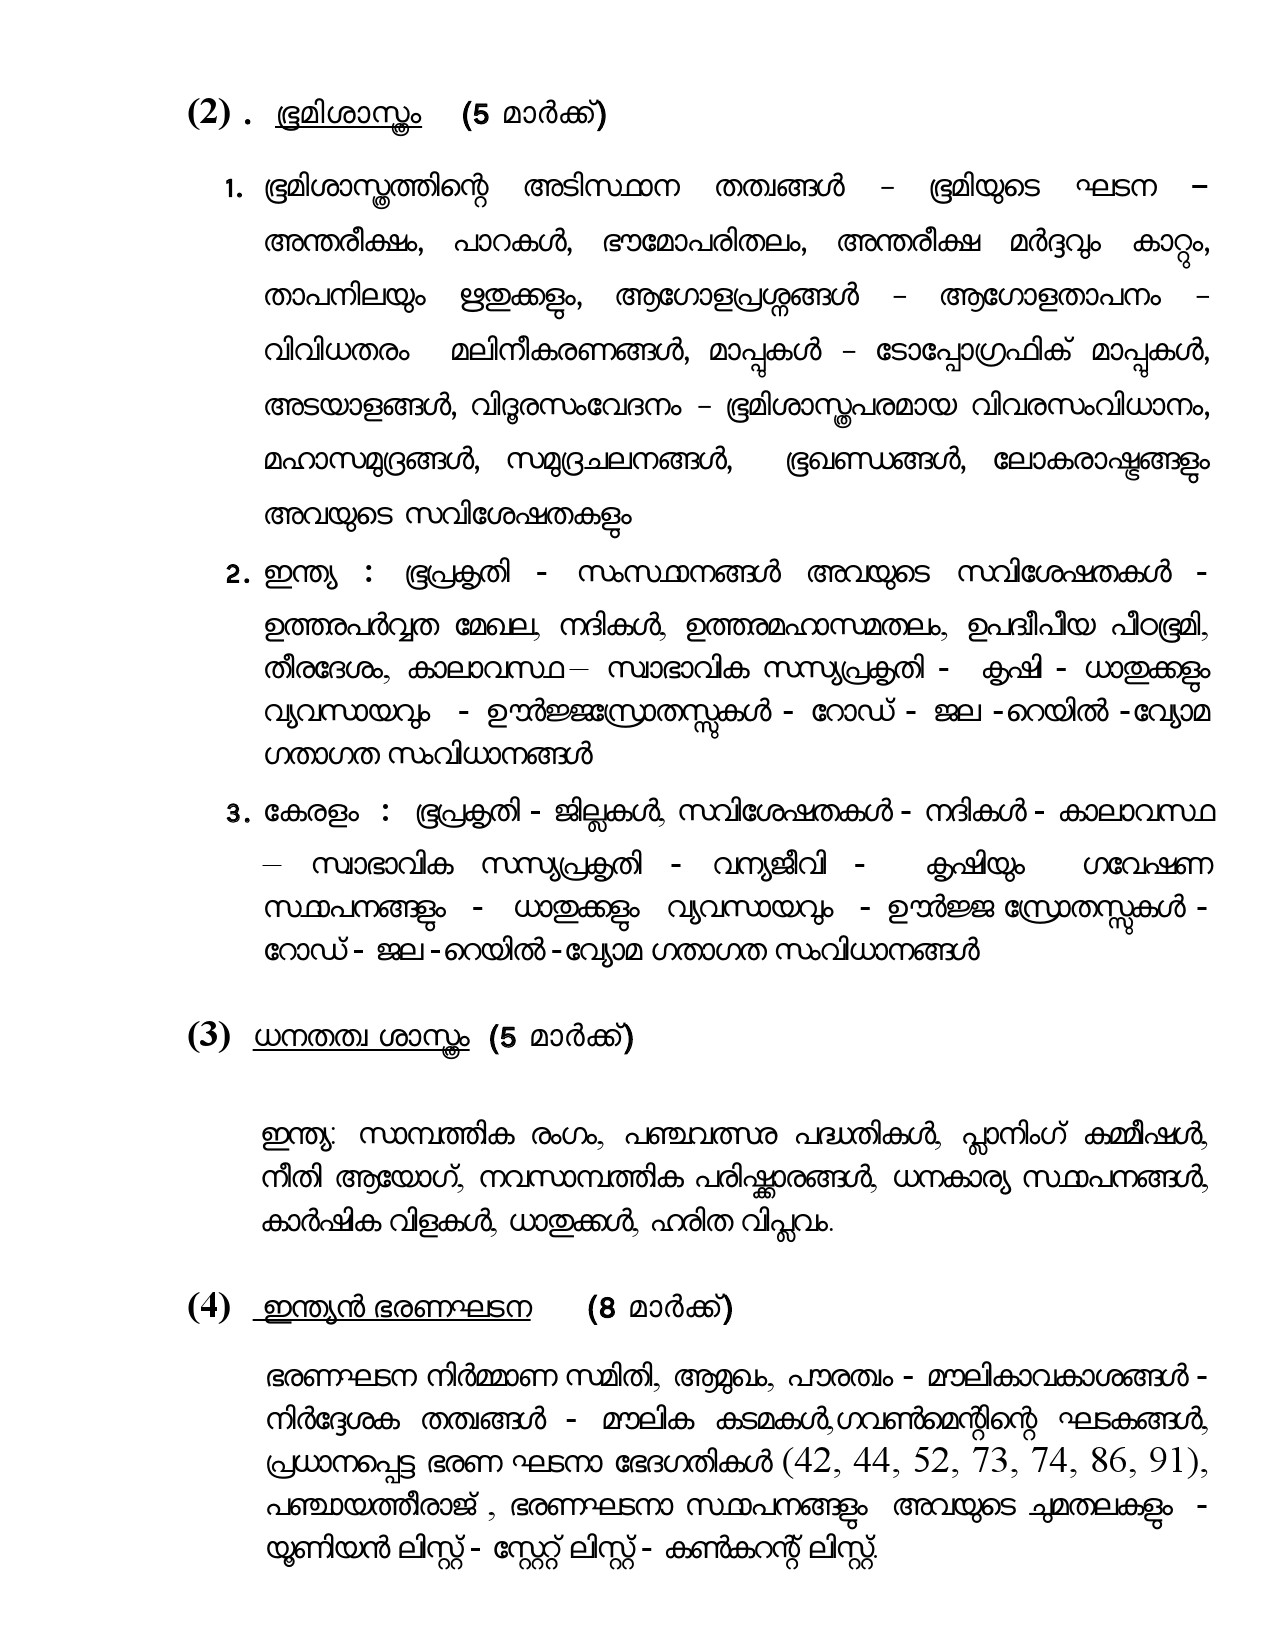 Beat Forest Officer Final Examination Syllabus For Plus Two Level - Notification Image 3